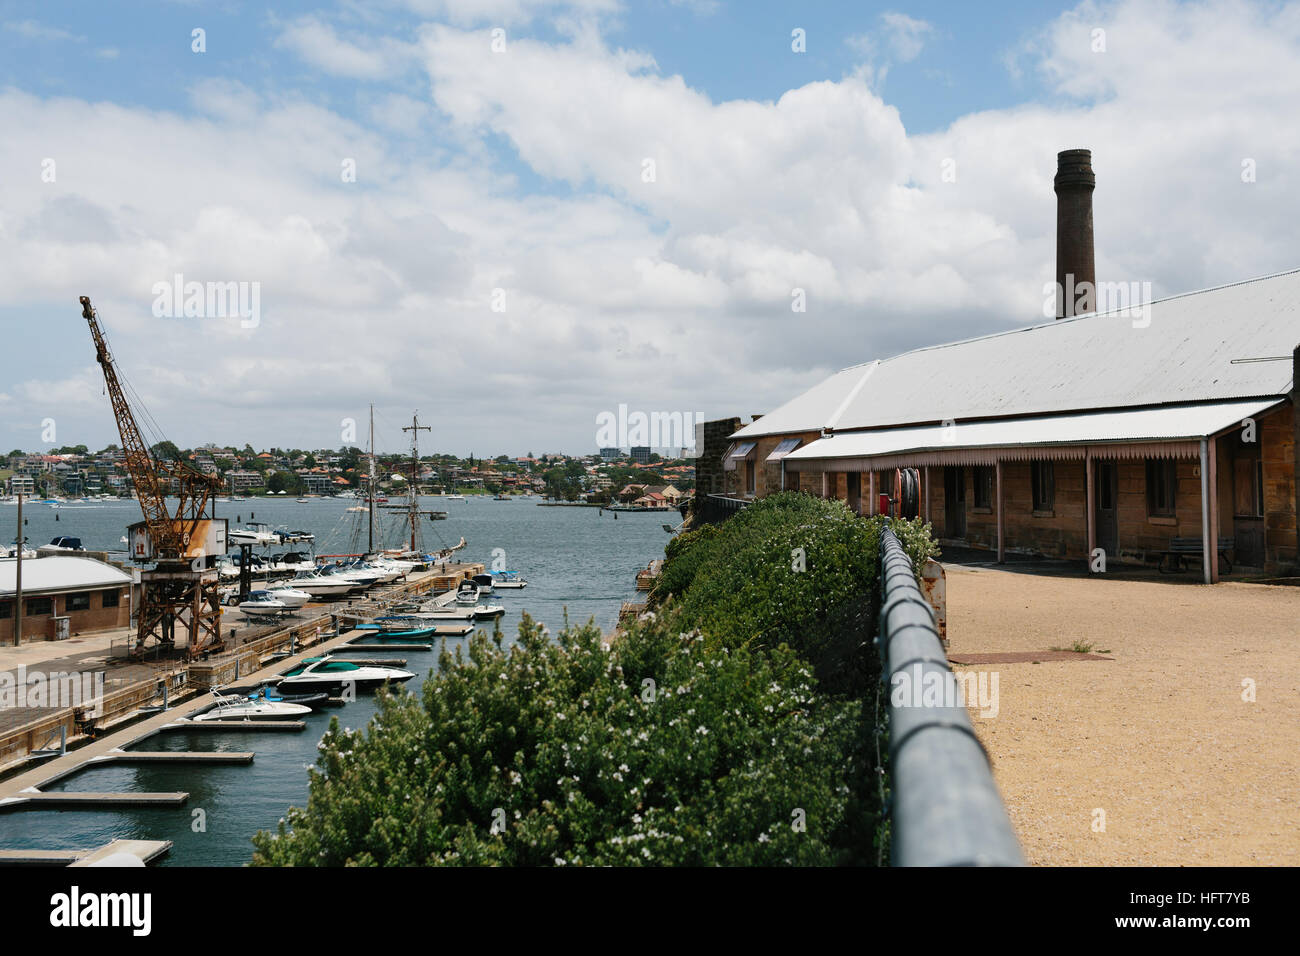 View of the Docks Precinct and Convict building at Cockatoo Island Stock Photo